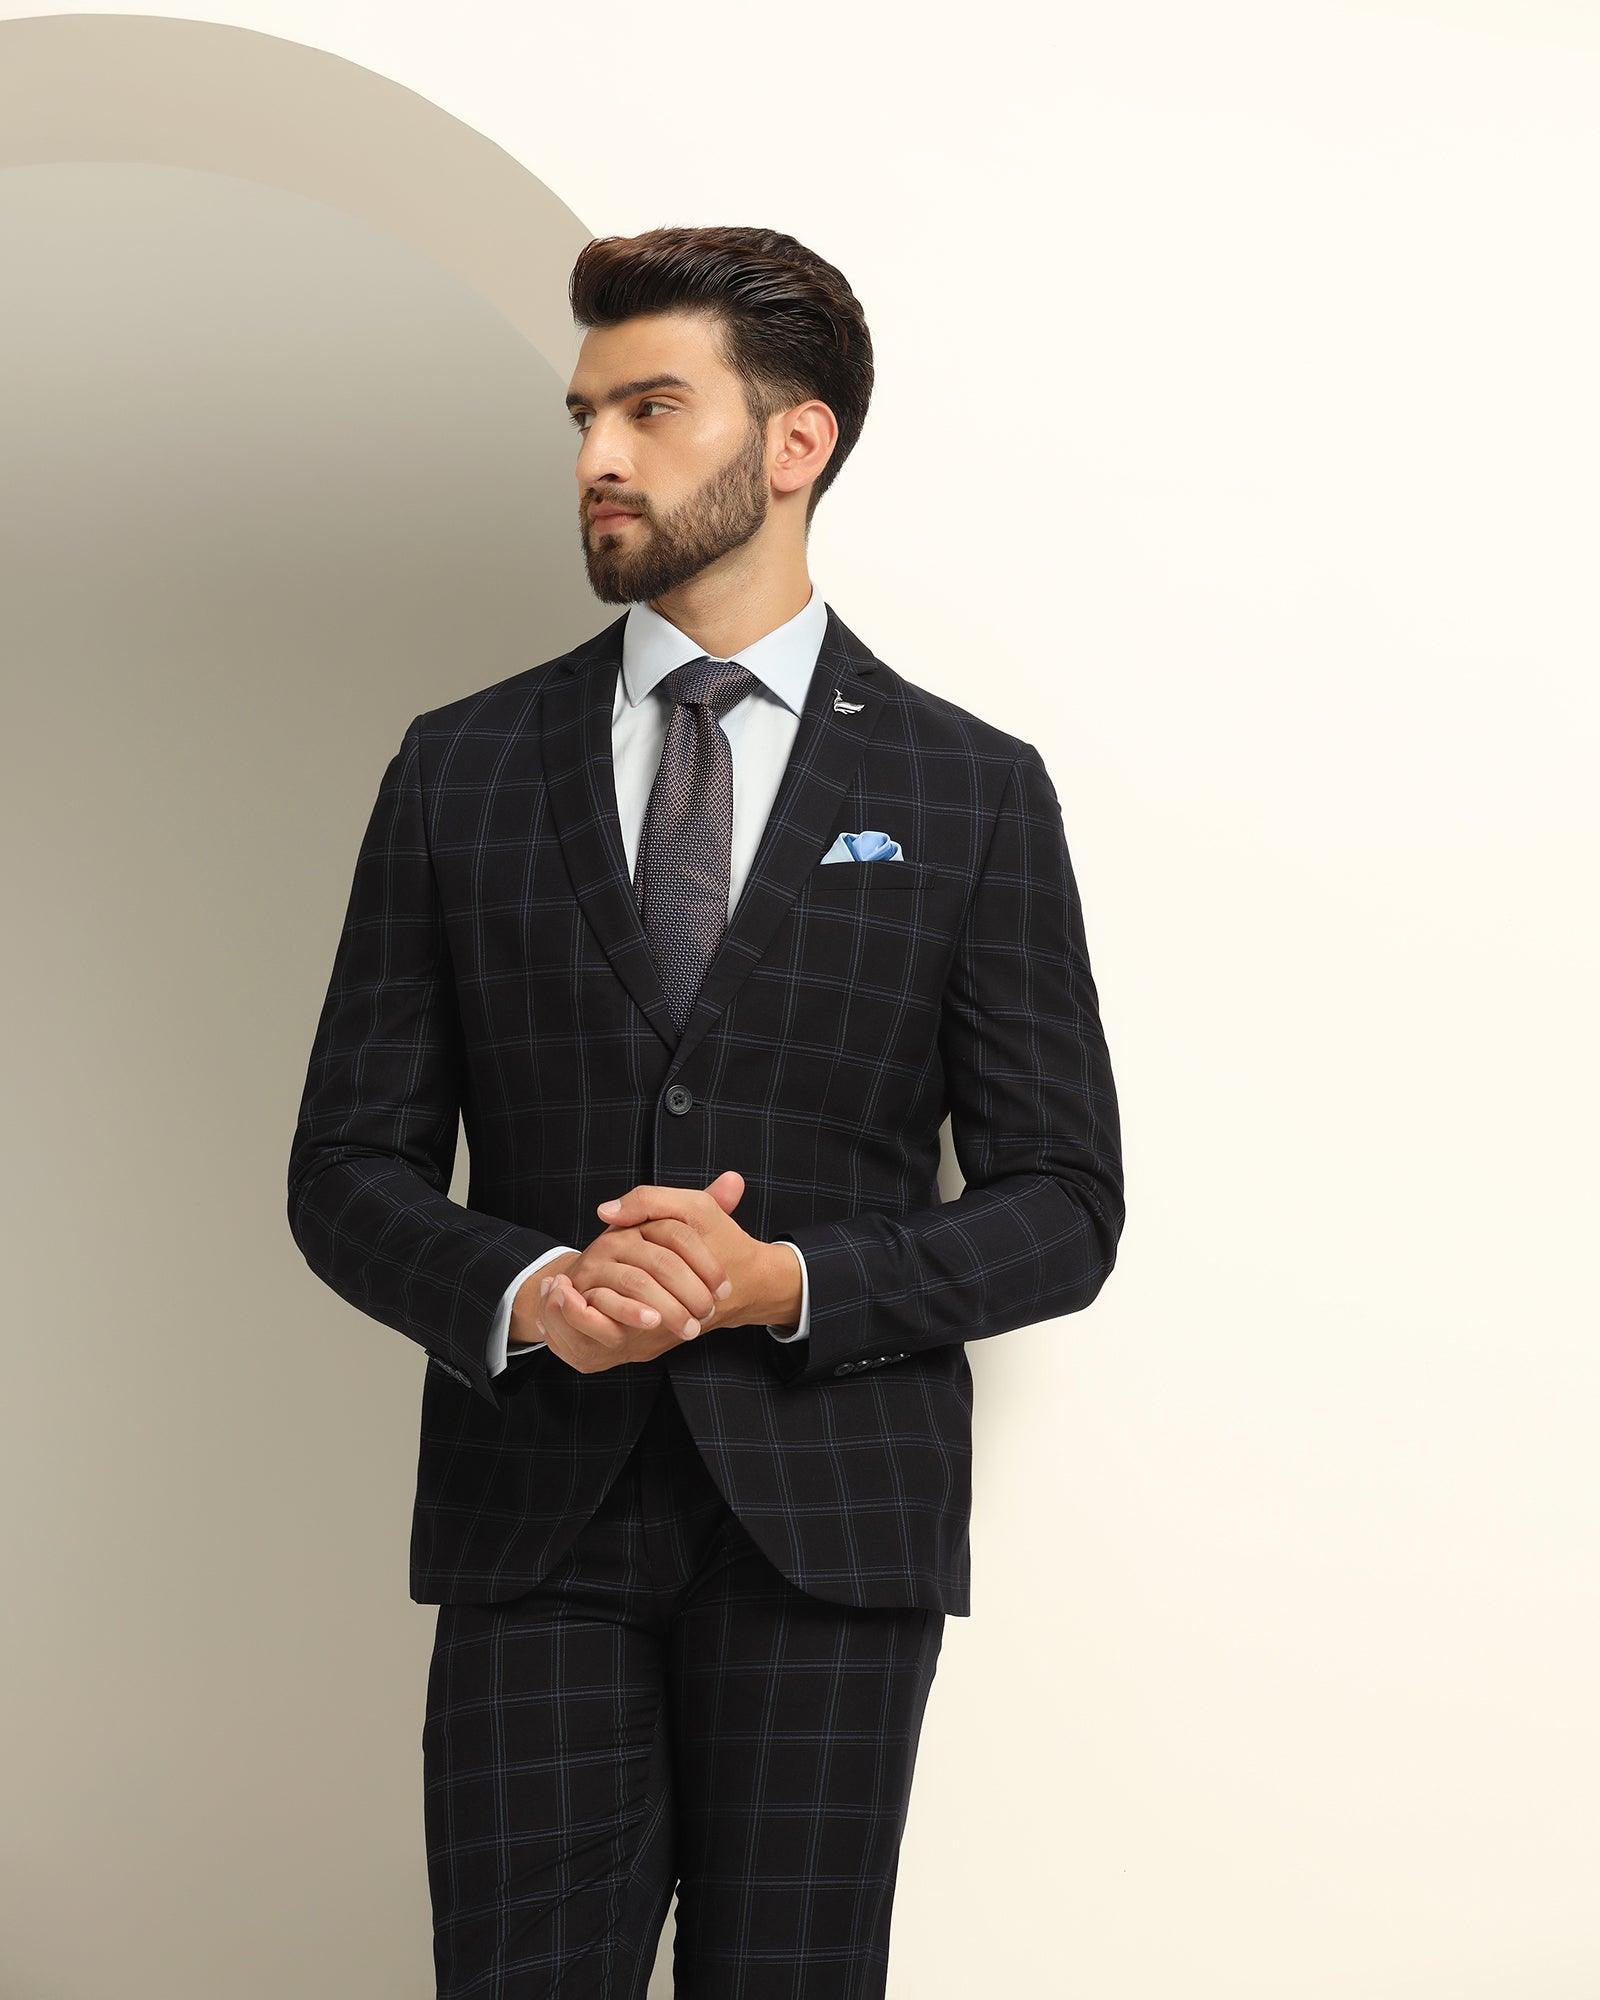 Mens 3 Piece Slim fit Checked Suit Blue/Black Single Breasted Vintage Suits, Black,X-Small at Amazon Men's Clothing store